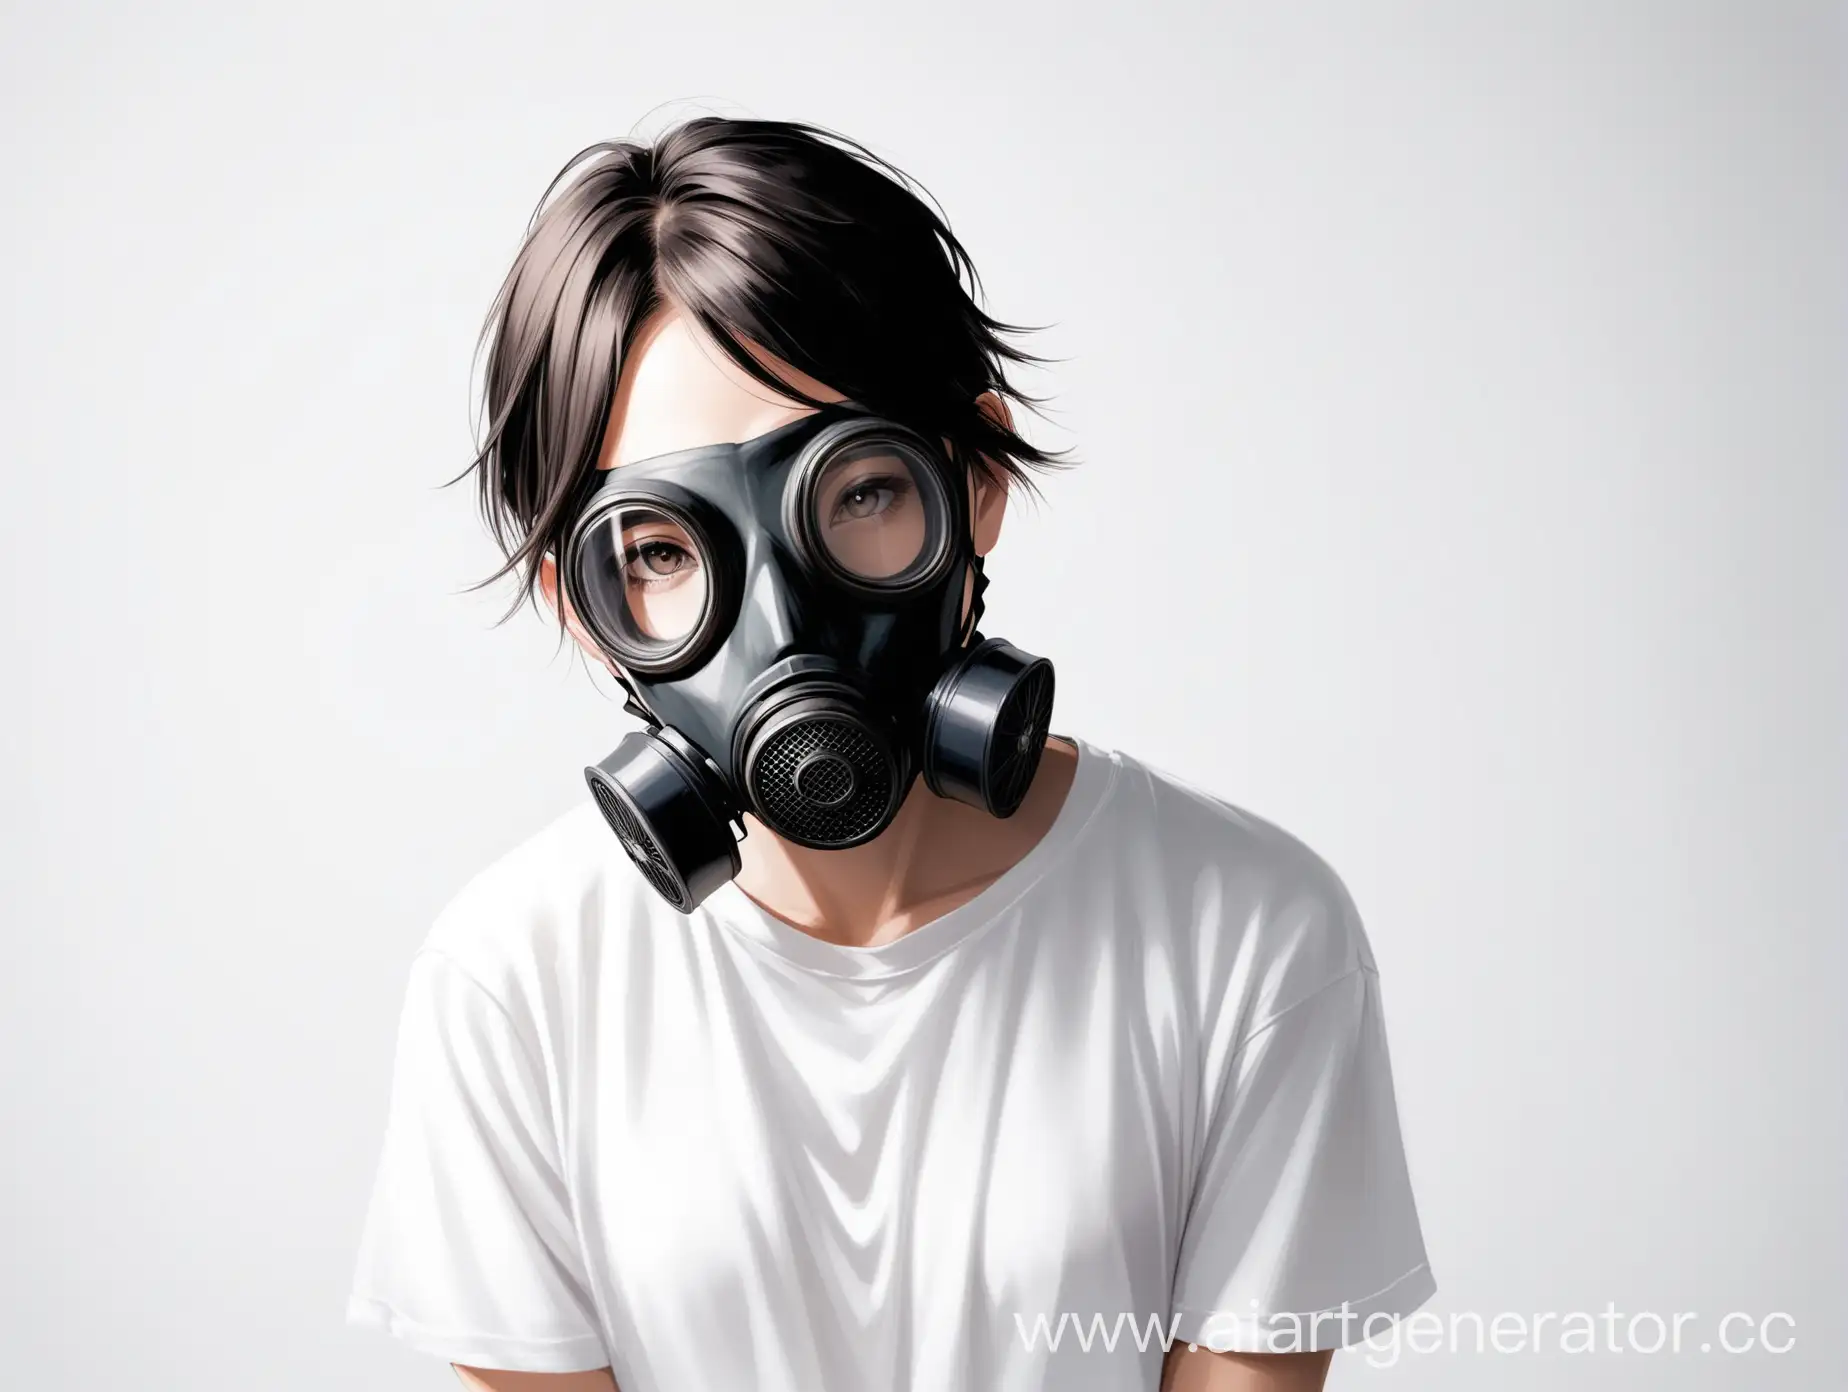 Person-Wearing-Gas-Mask-and-White-TShirt-on-White-Background